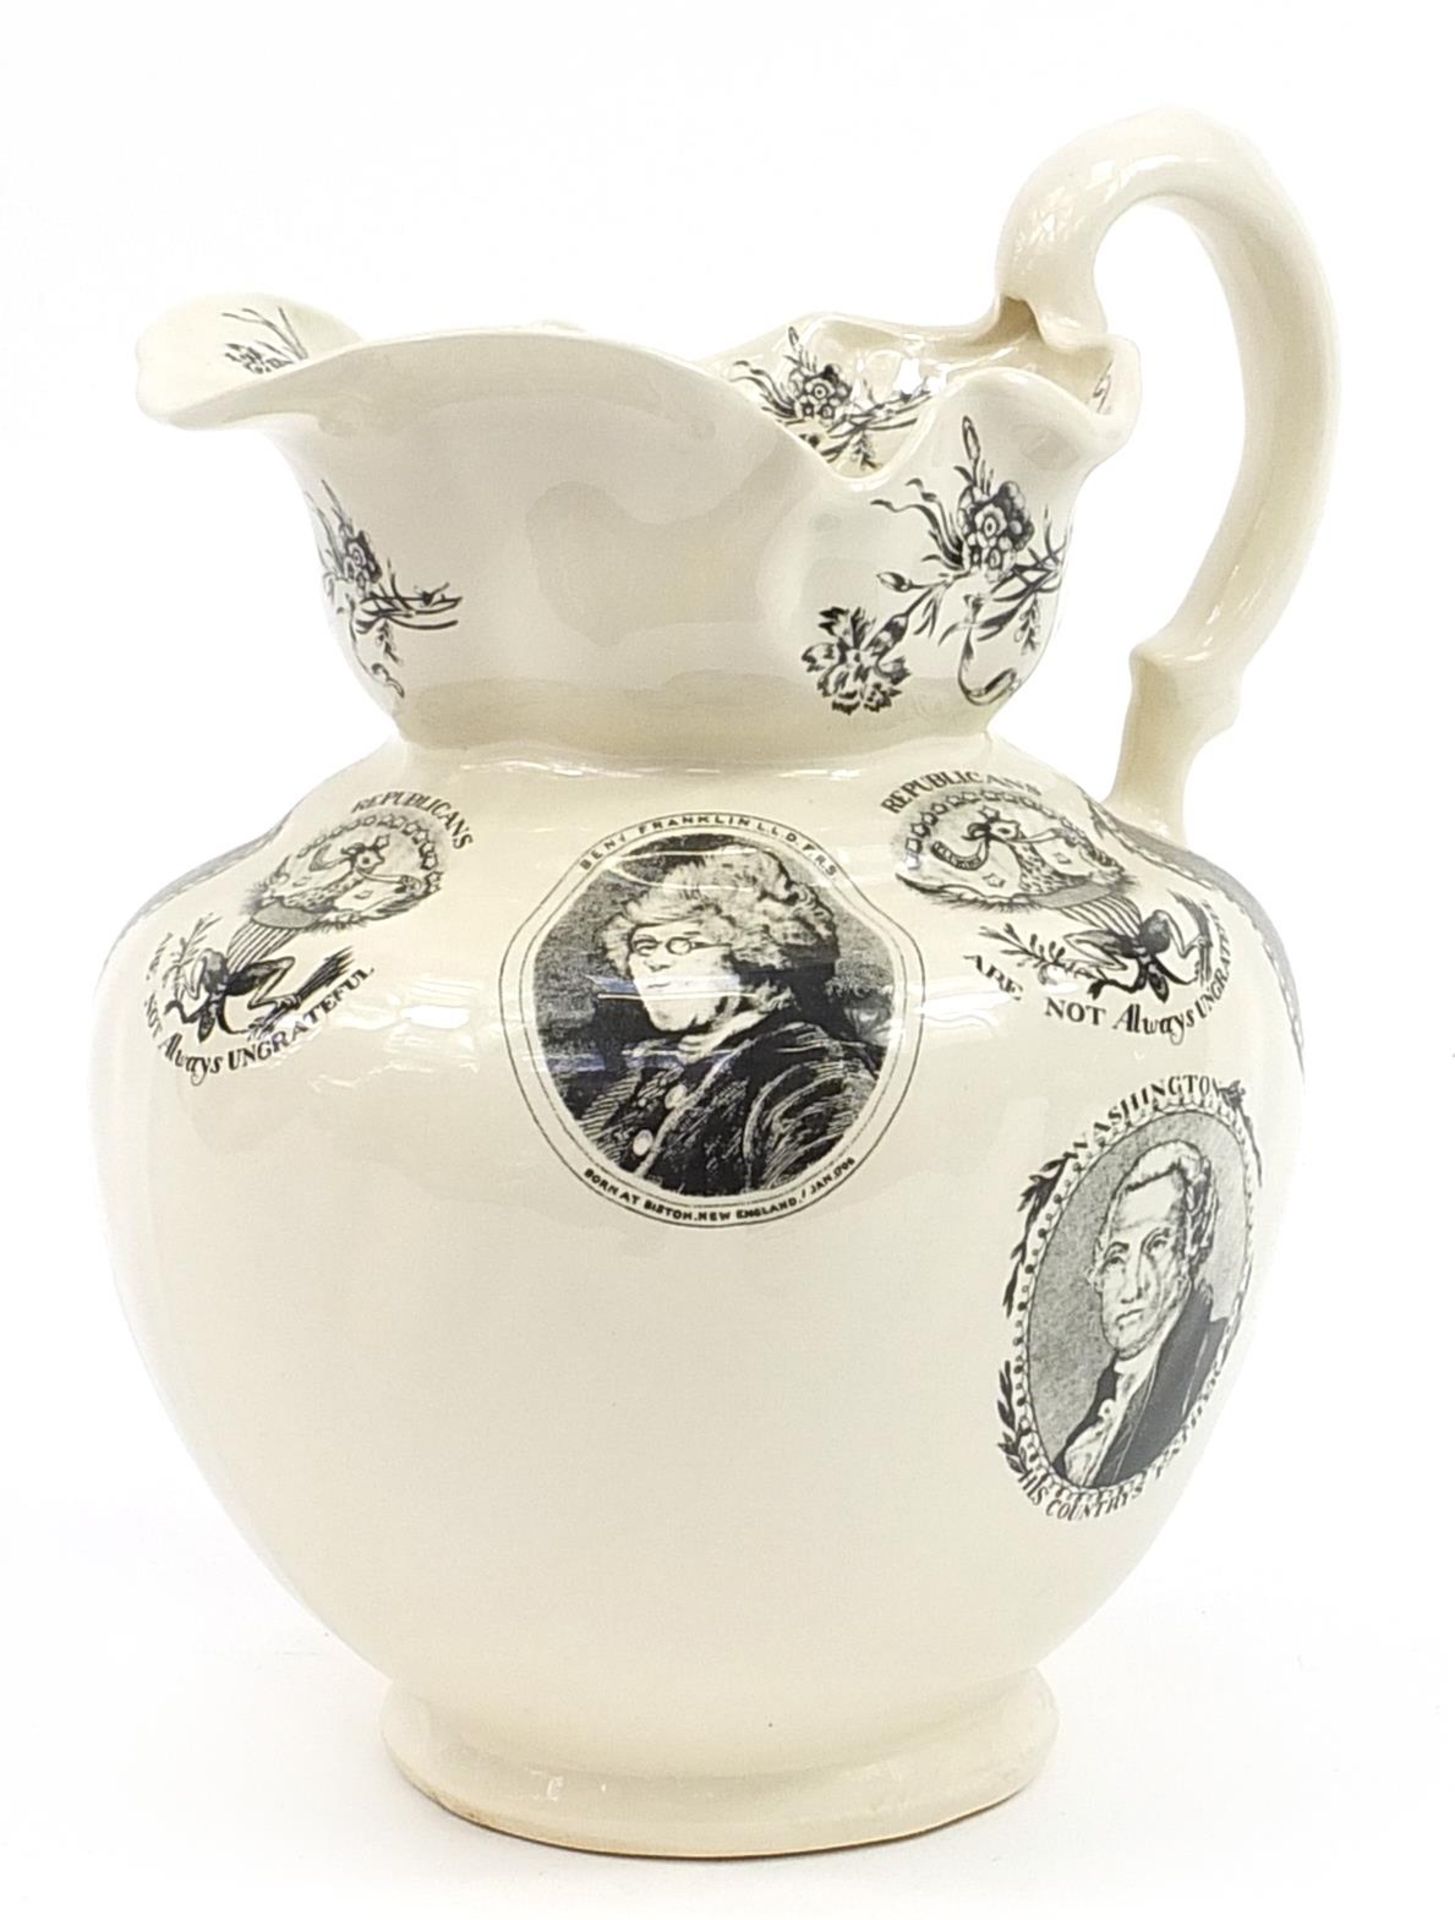 Staffordshire ironstone jug commemorating American Presidents, inscribed Republicans are not